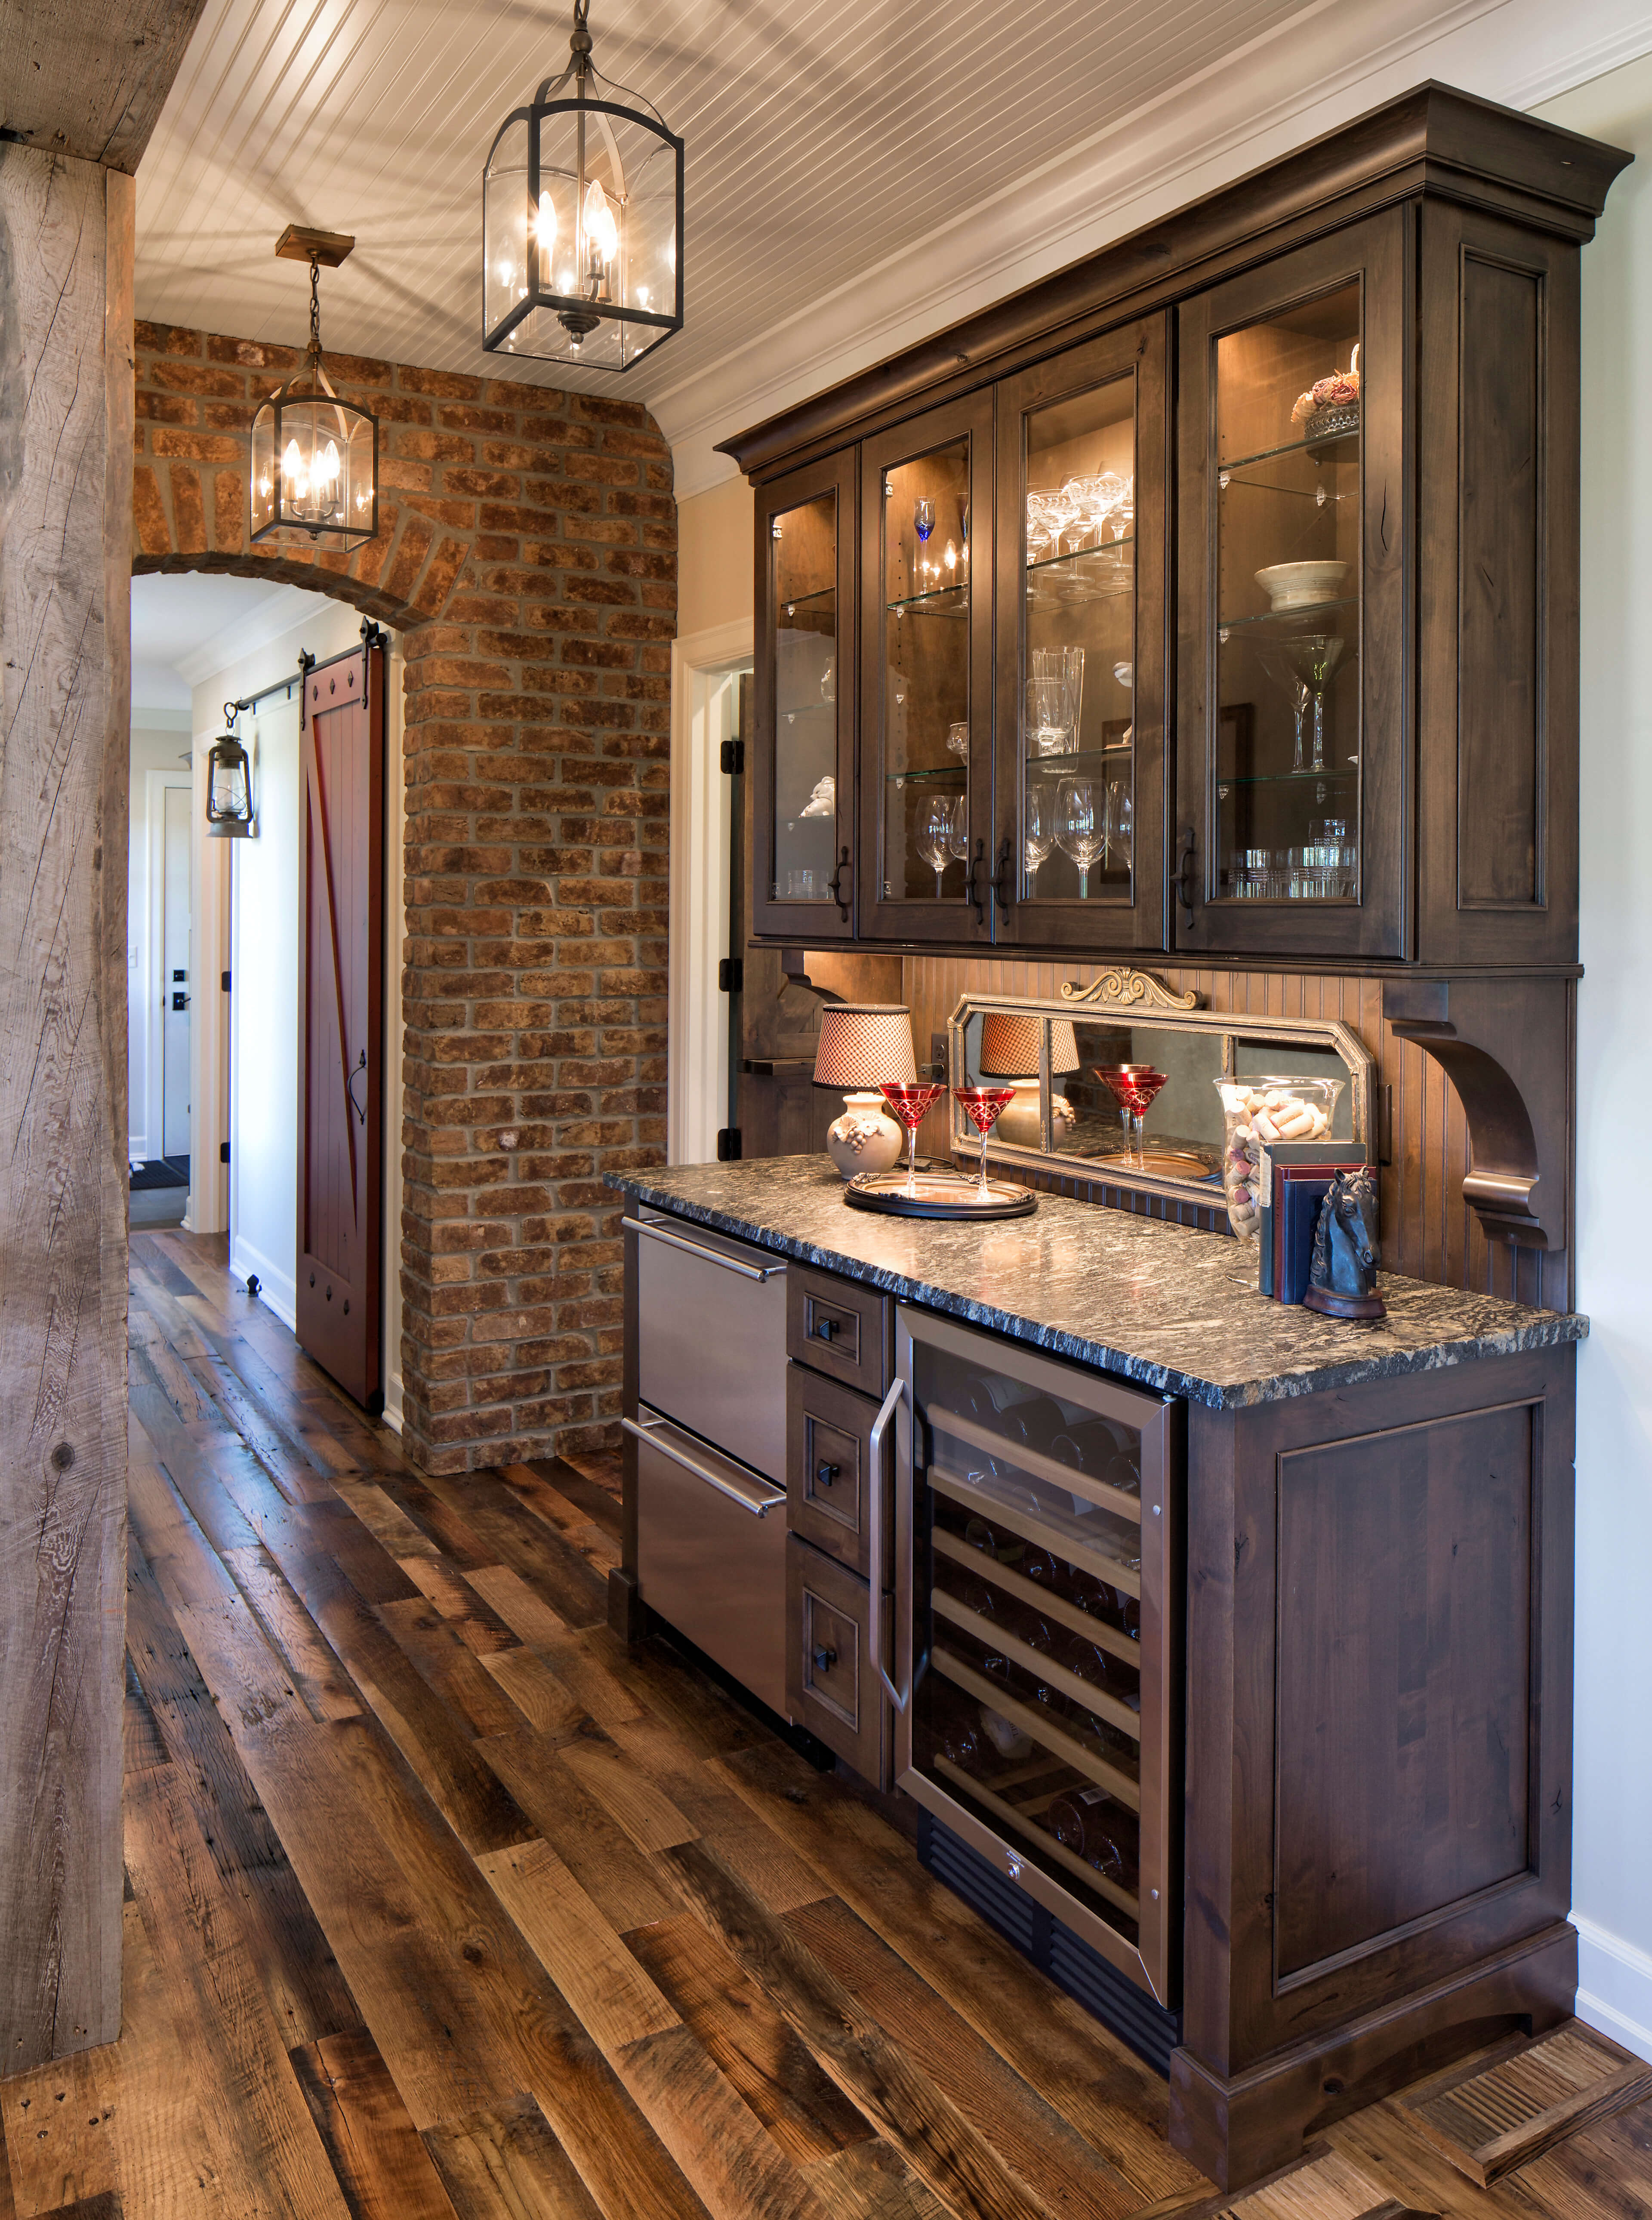 A rustic wet bar in a wide hallway.